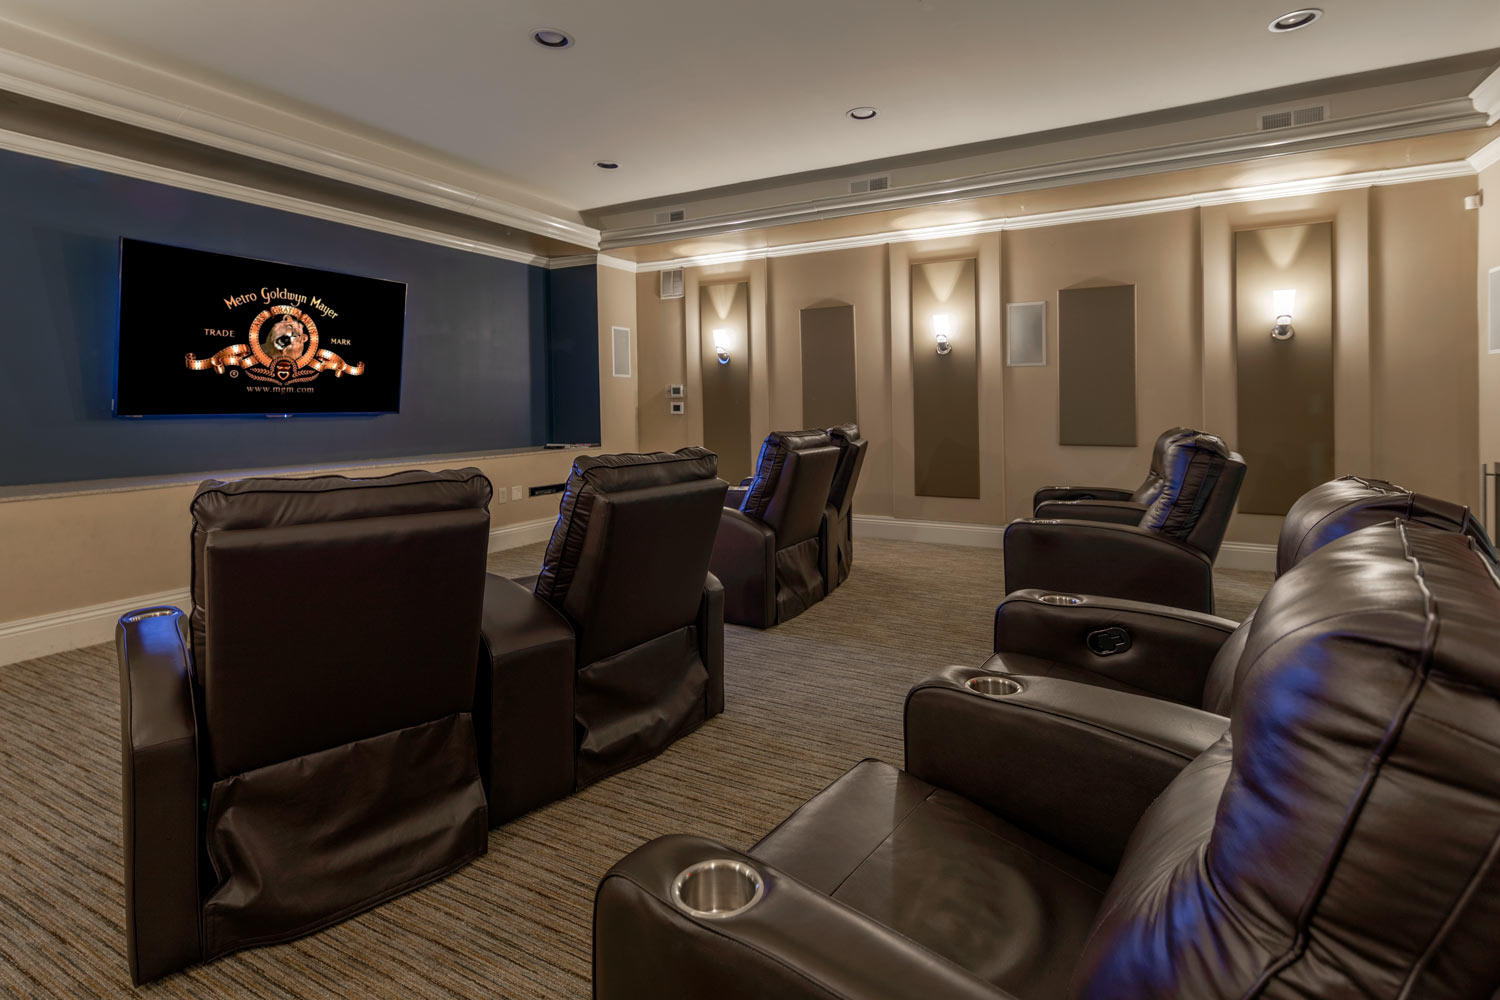 Enjoy a date night in our community movie theater